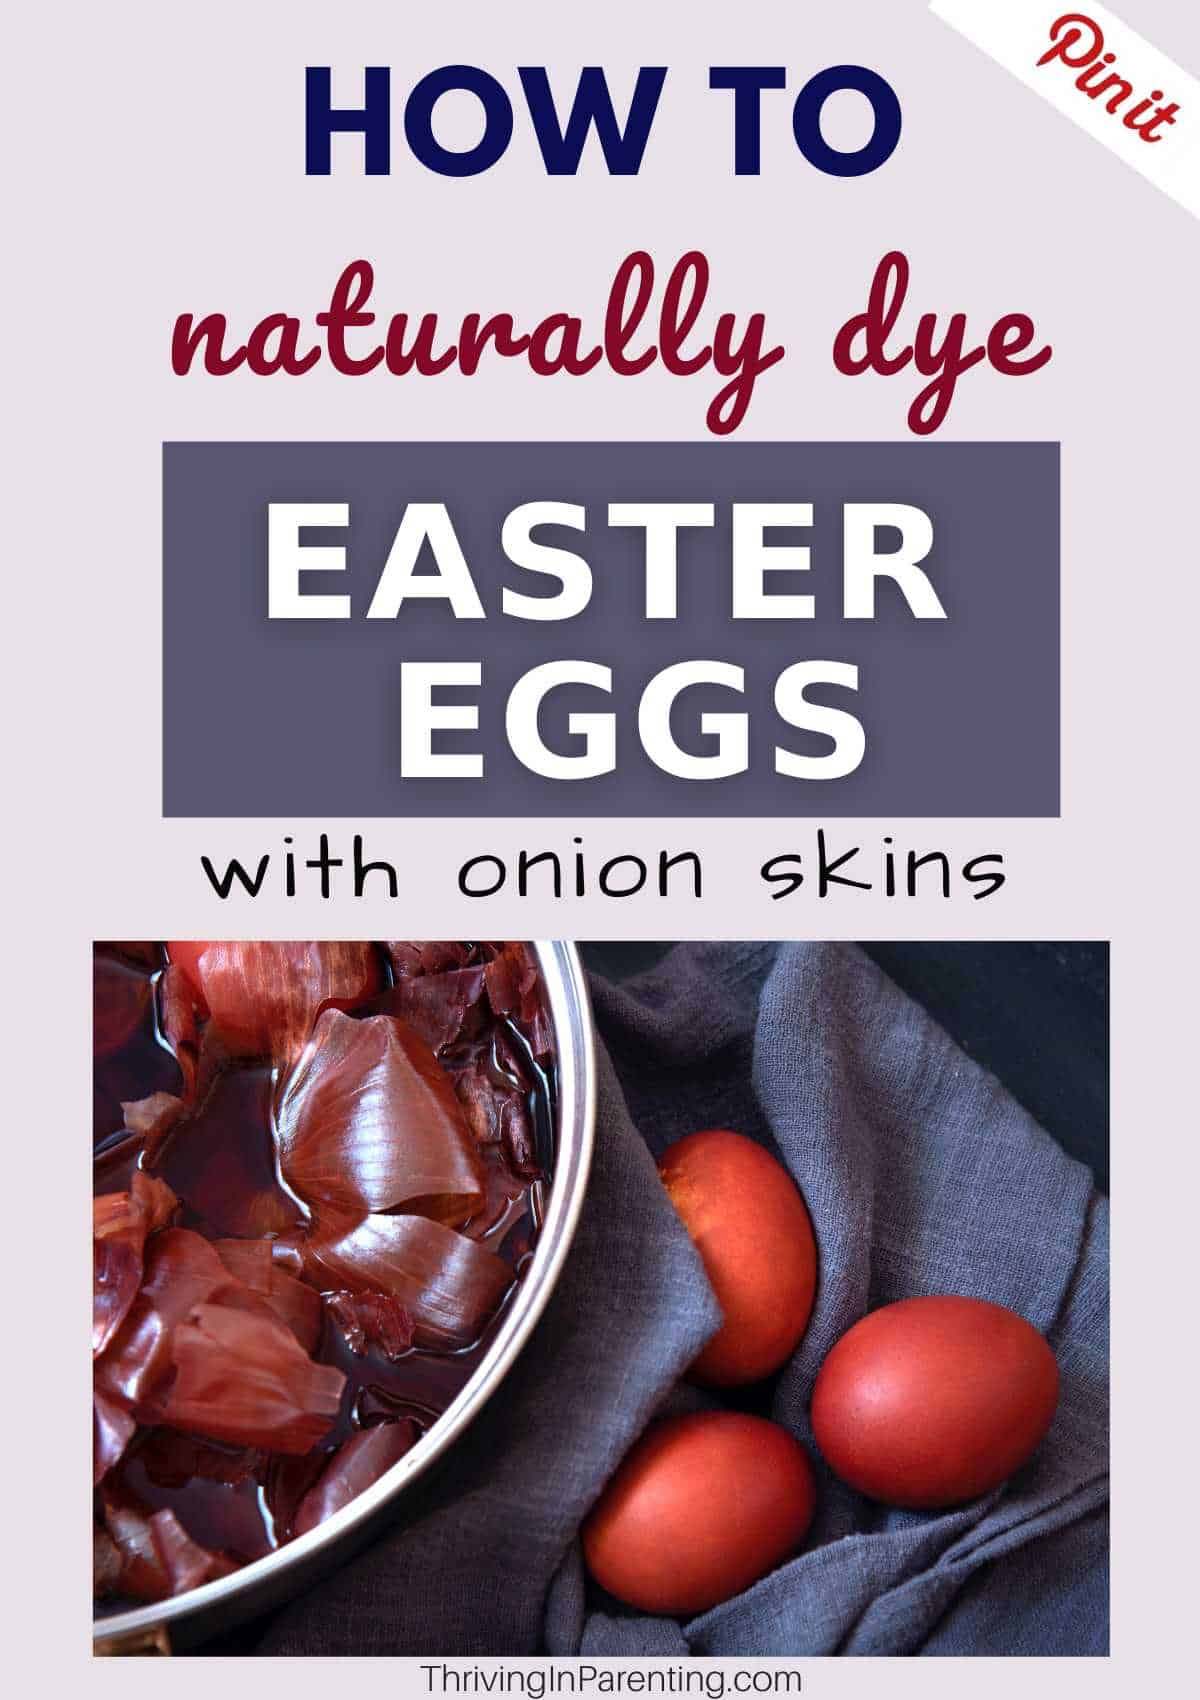 Dying Easter eggs with onion skins